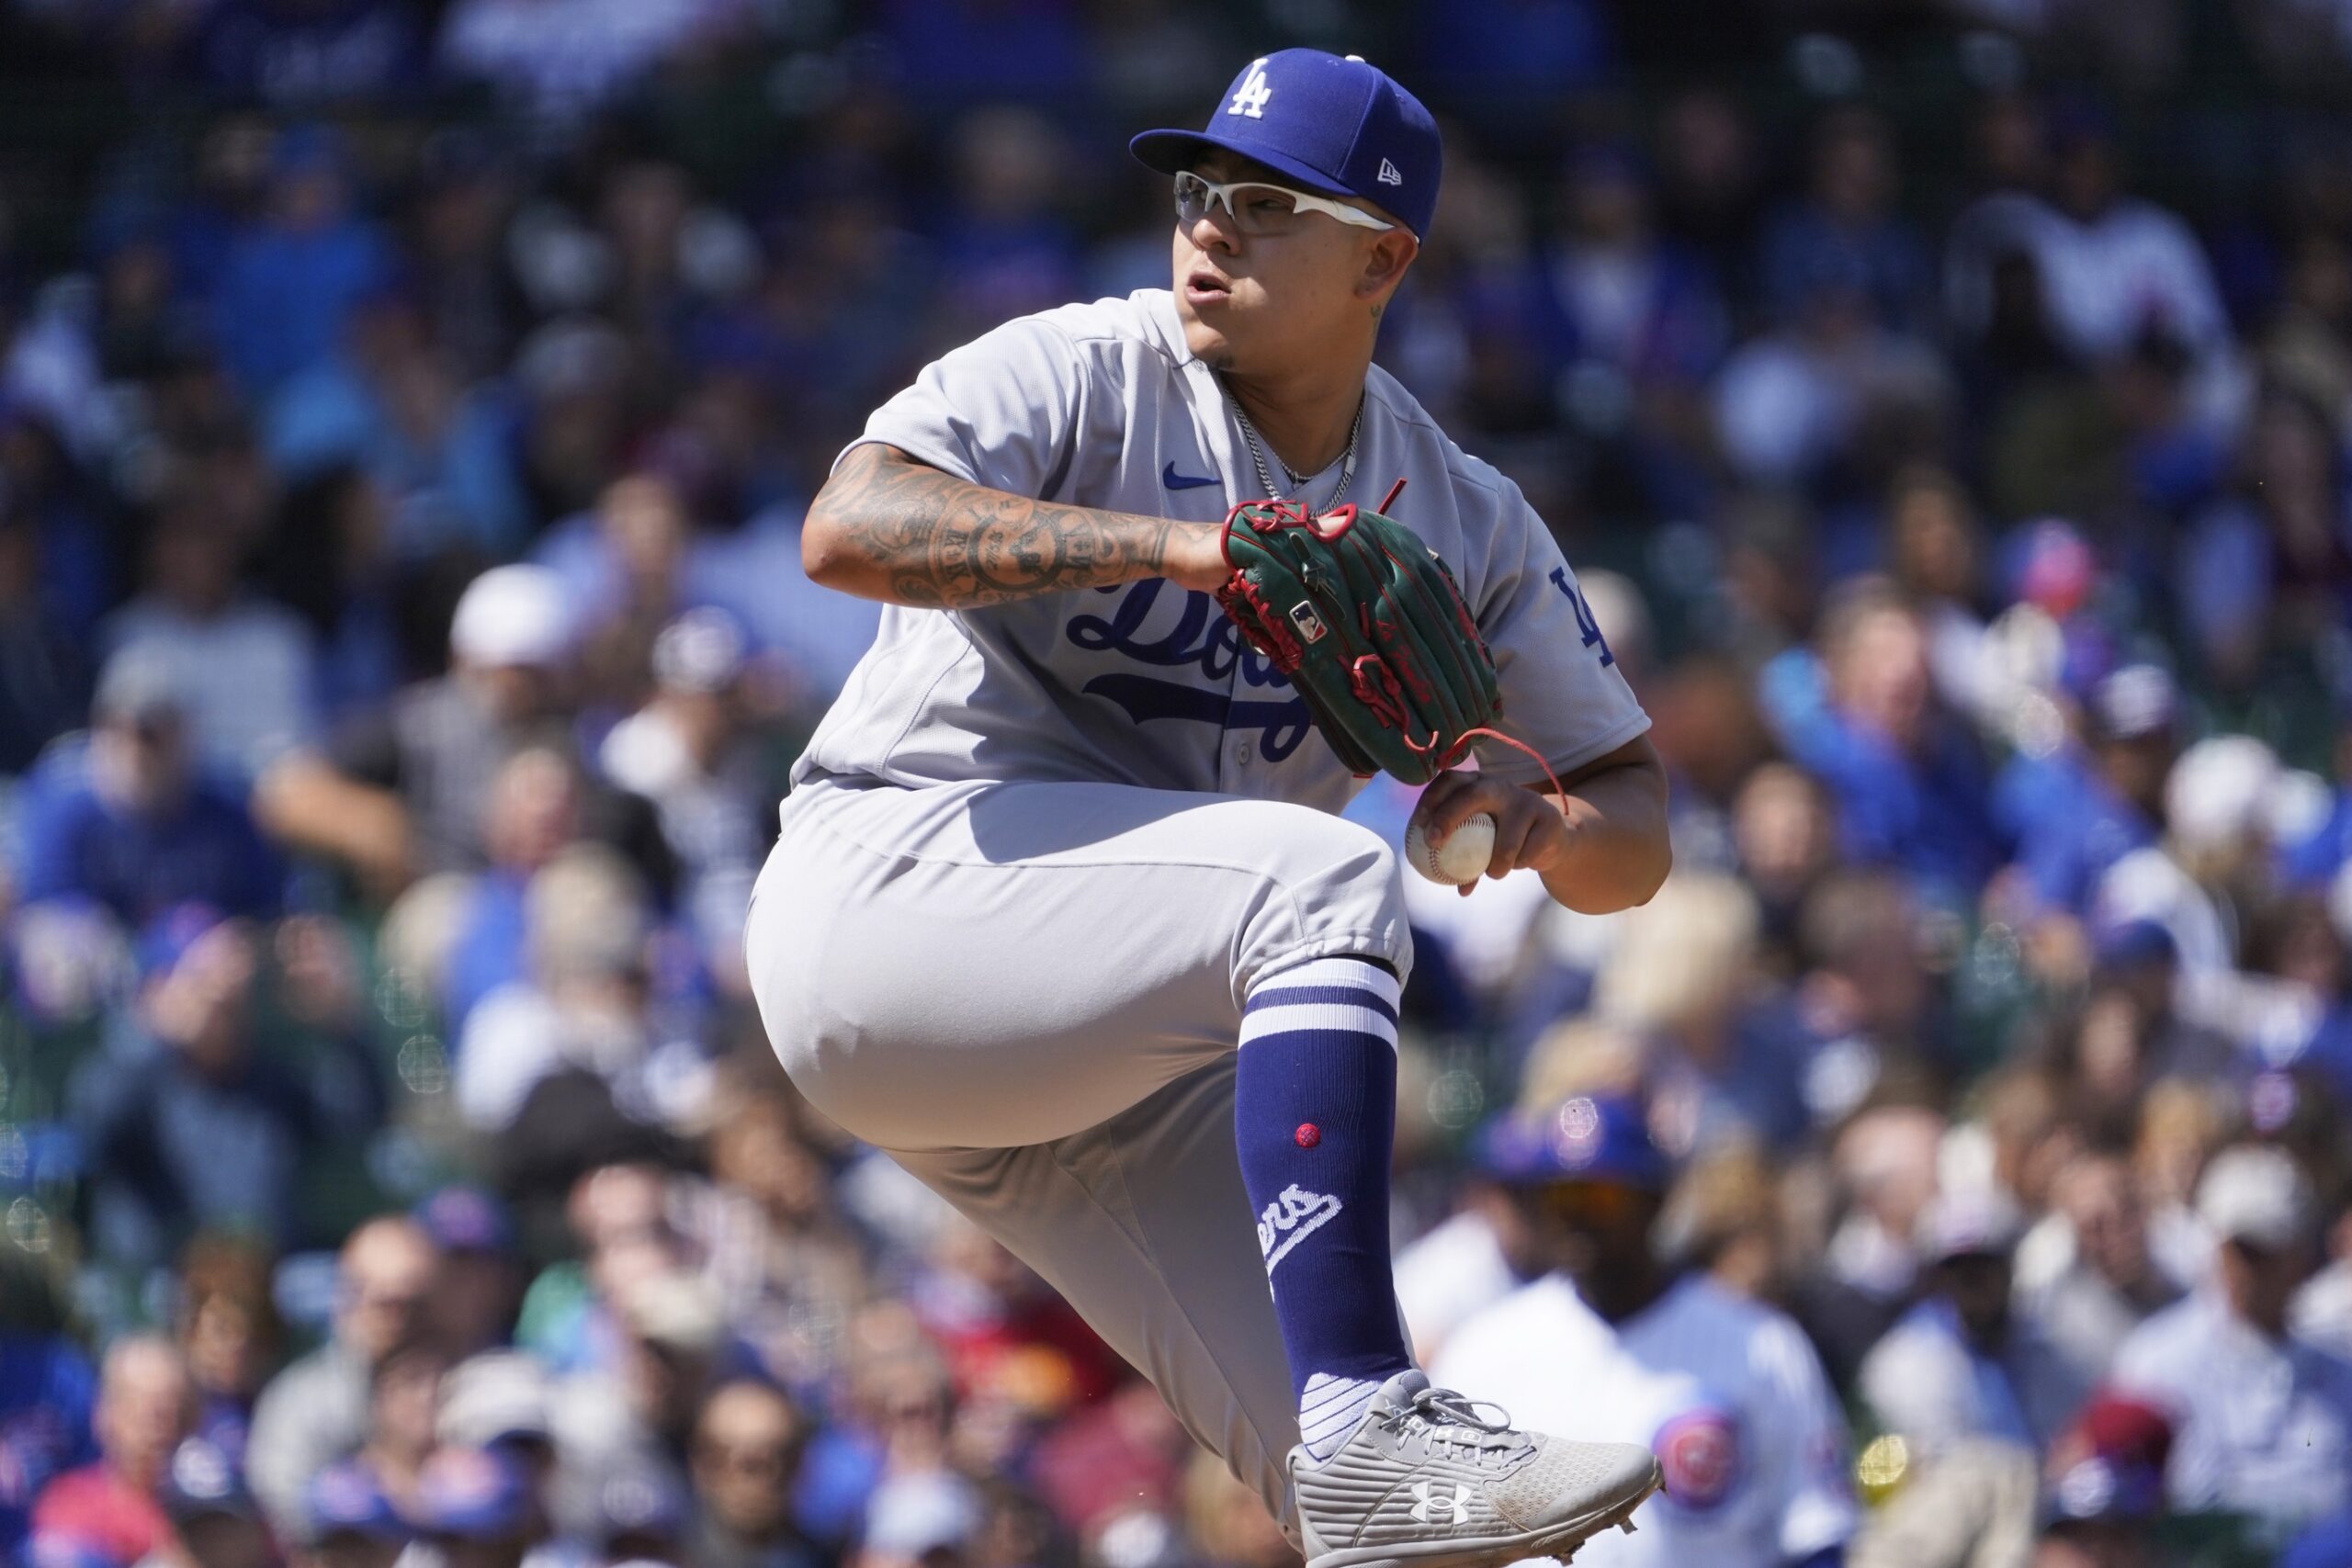 Dodgers Score Live Game Updates and Odds vs Padres on Sunday, Urias/Musgrove, How to Watch Dodgers Nation